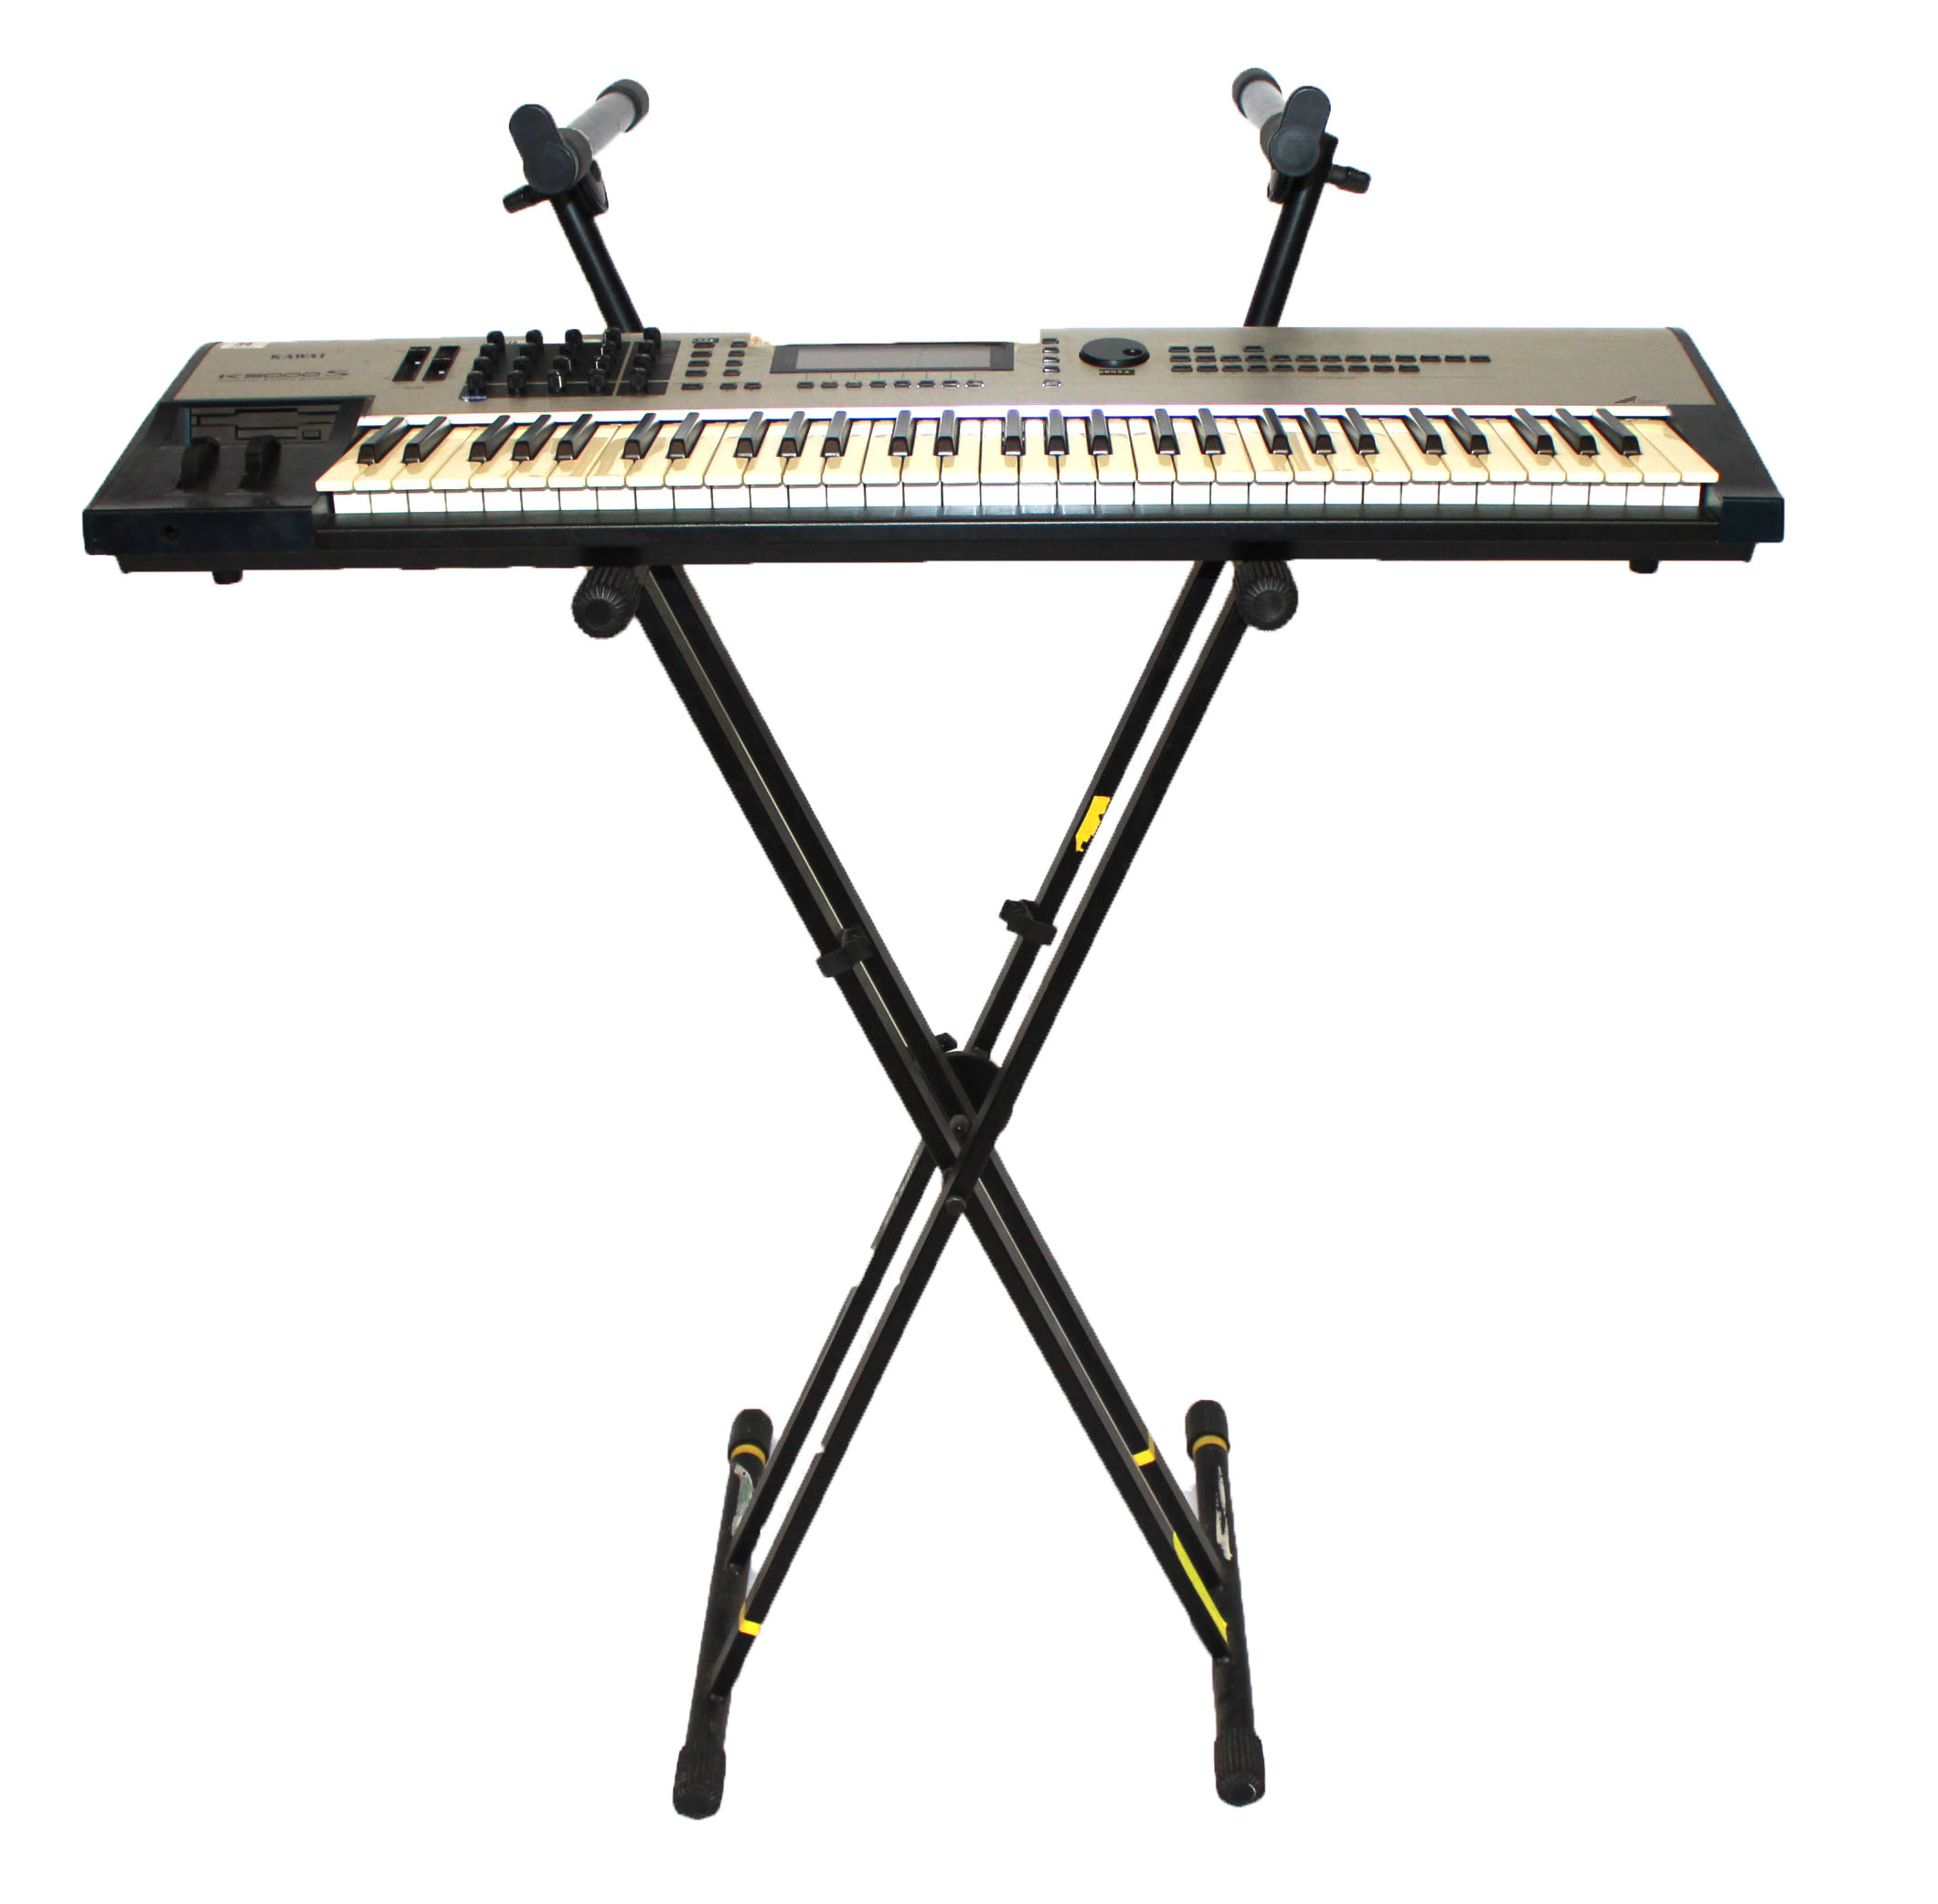 A KAWAI K500S KEYBOARD SYNTHESIZER With pitch bend and modulation features, complete with adjustable